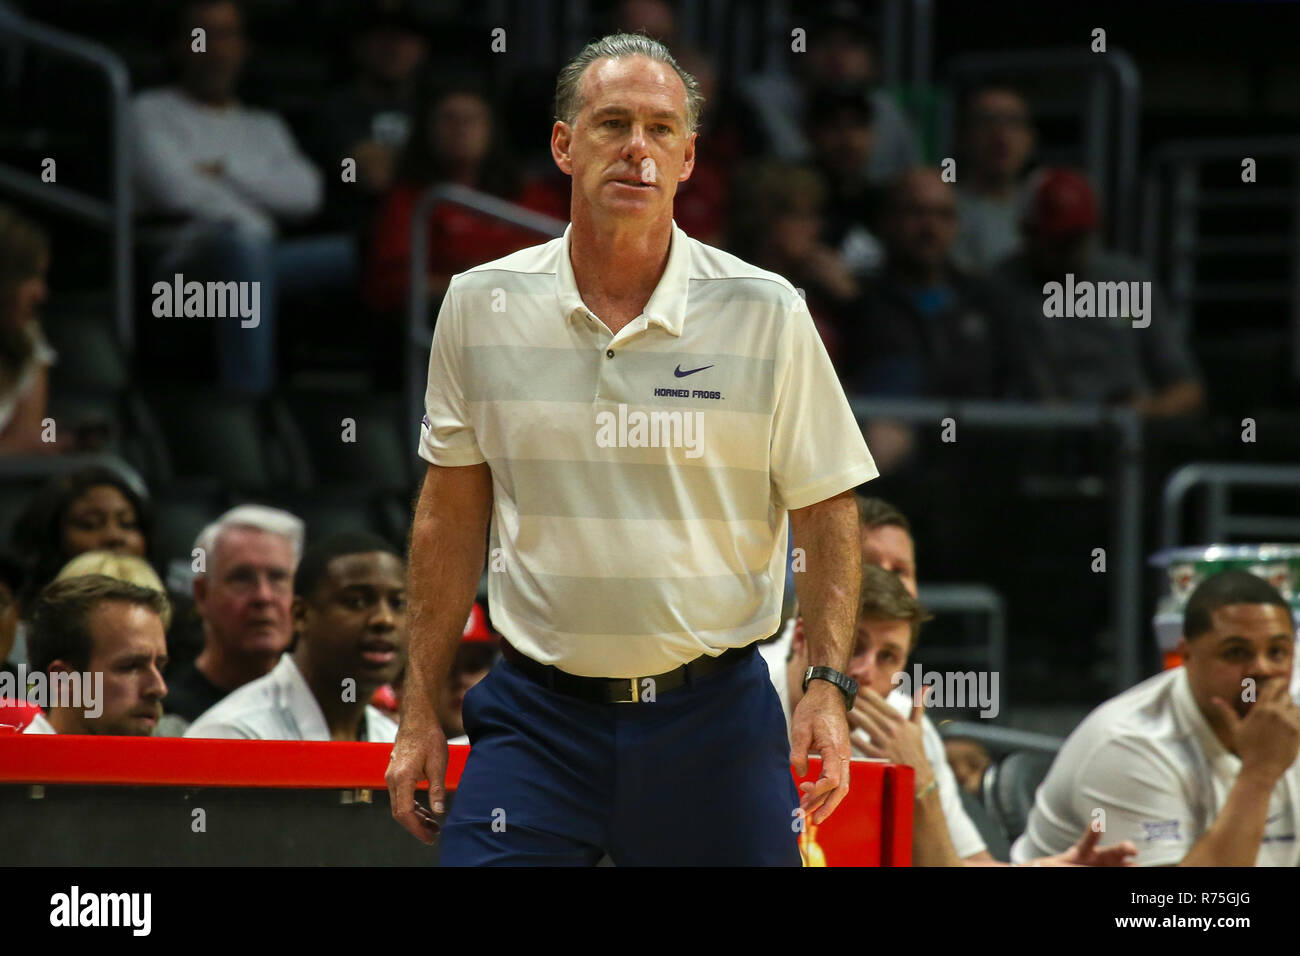 Los Angeles, CA, USA. 07th Dec, 2018. TCU Horned Frogs head coach Jamie Dixon during the Hall of Fame Classic College basketball game on December 7, 2018 at the Staples Center in Los Angeles, CA. (Photo by jordon Kelly/CSM) Credit: csm/Alamy Live News Stock Photo